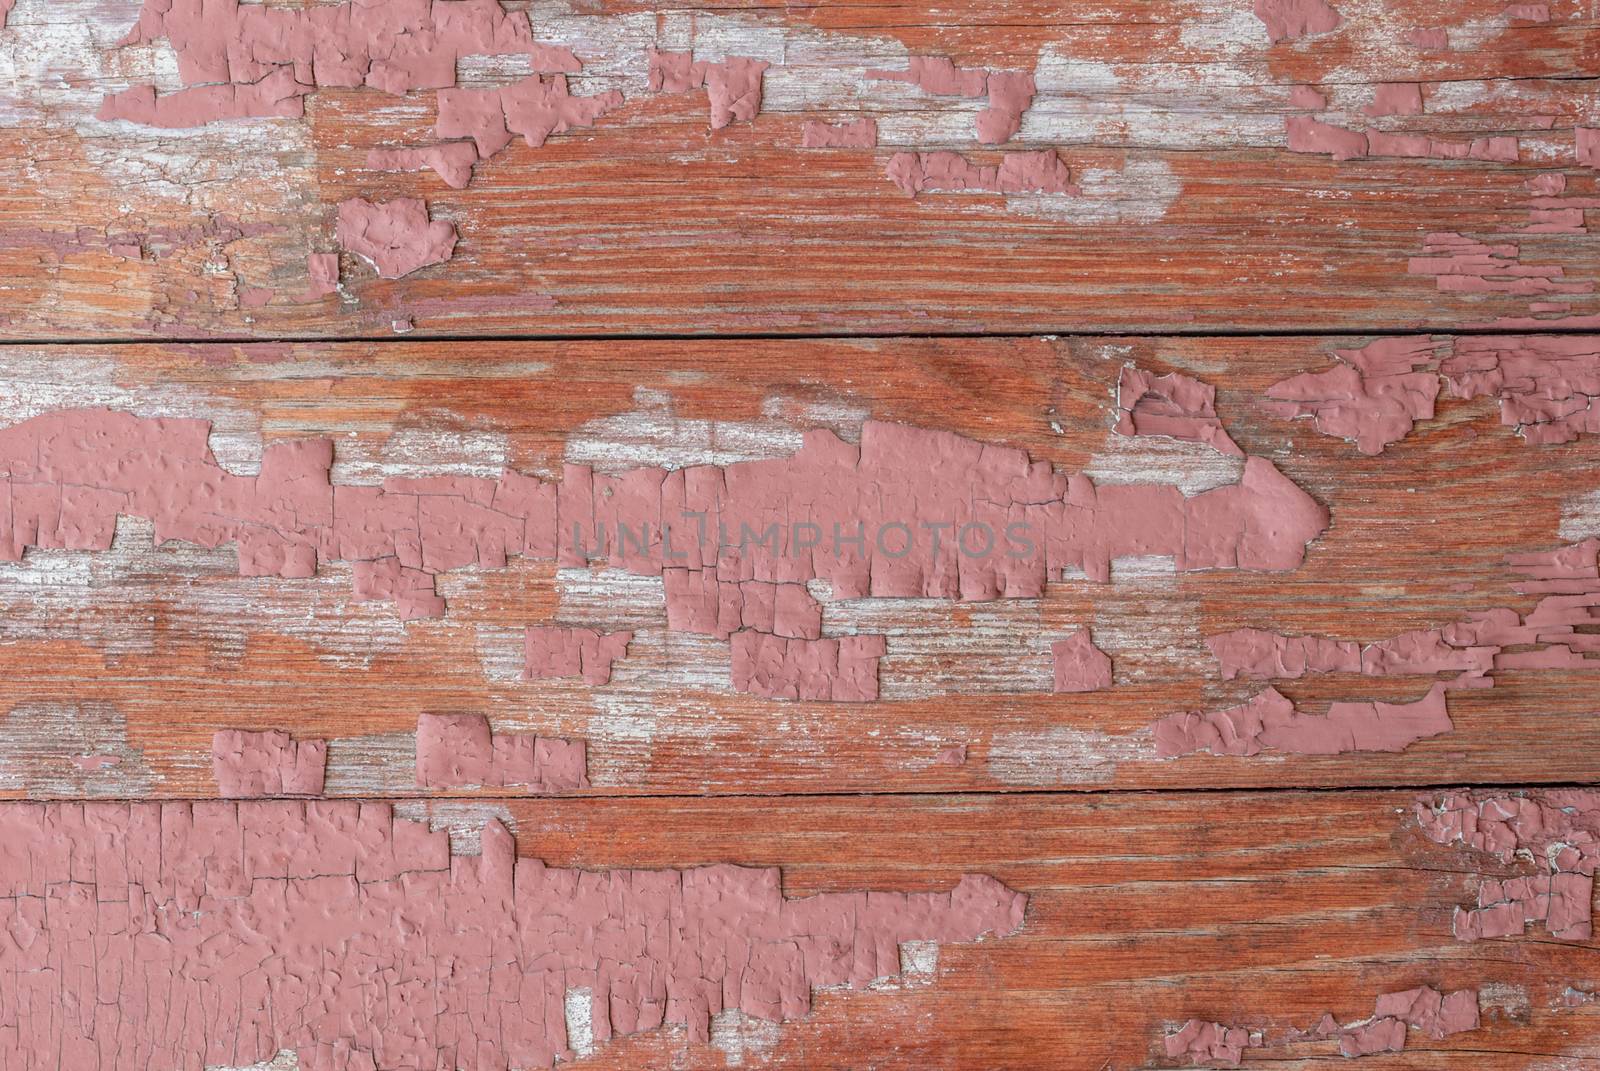 chipped paint on the door of the old boards, great background or texture for your project by uvisni